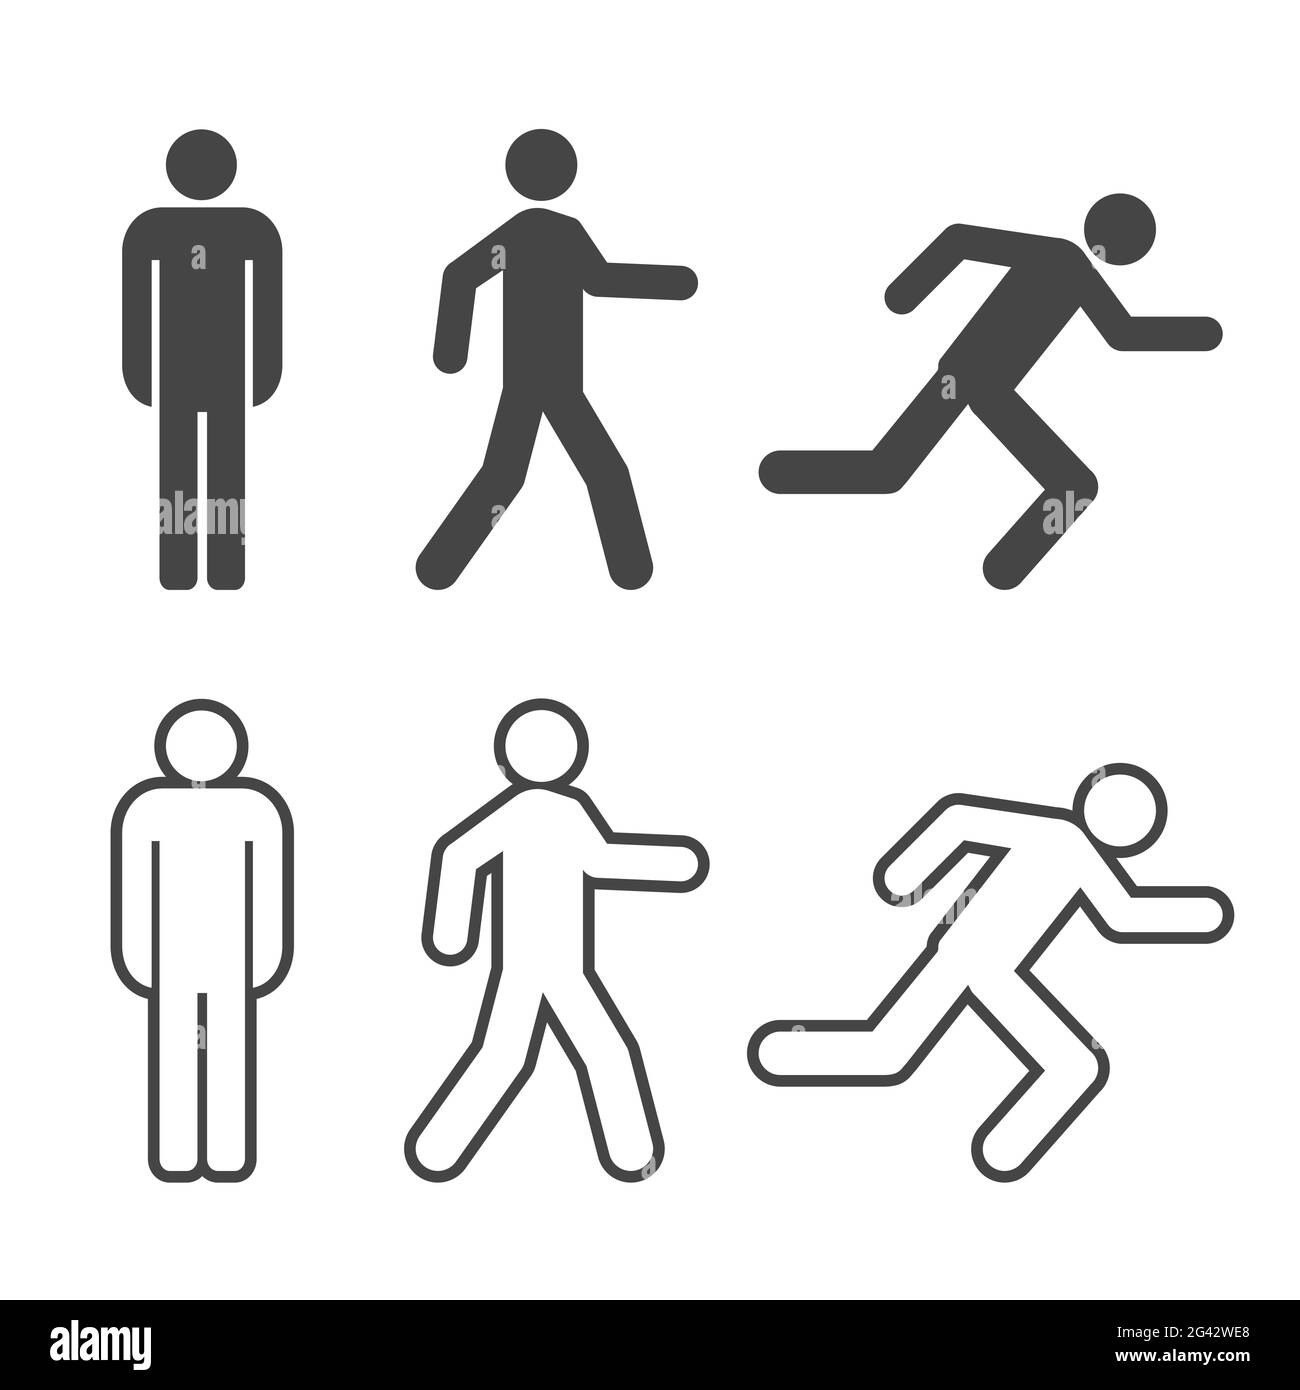 Man stands, walk and run silhouette and outline icon set. Pedestrian  crossing sign. People in motion. Stick figure simple icons. illustration  Stock Photo - Alamy